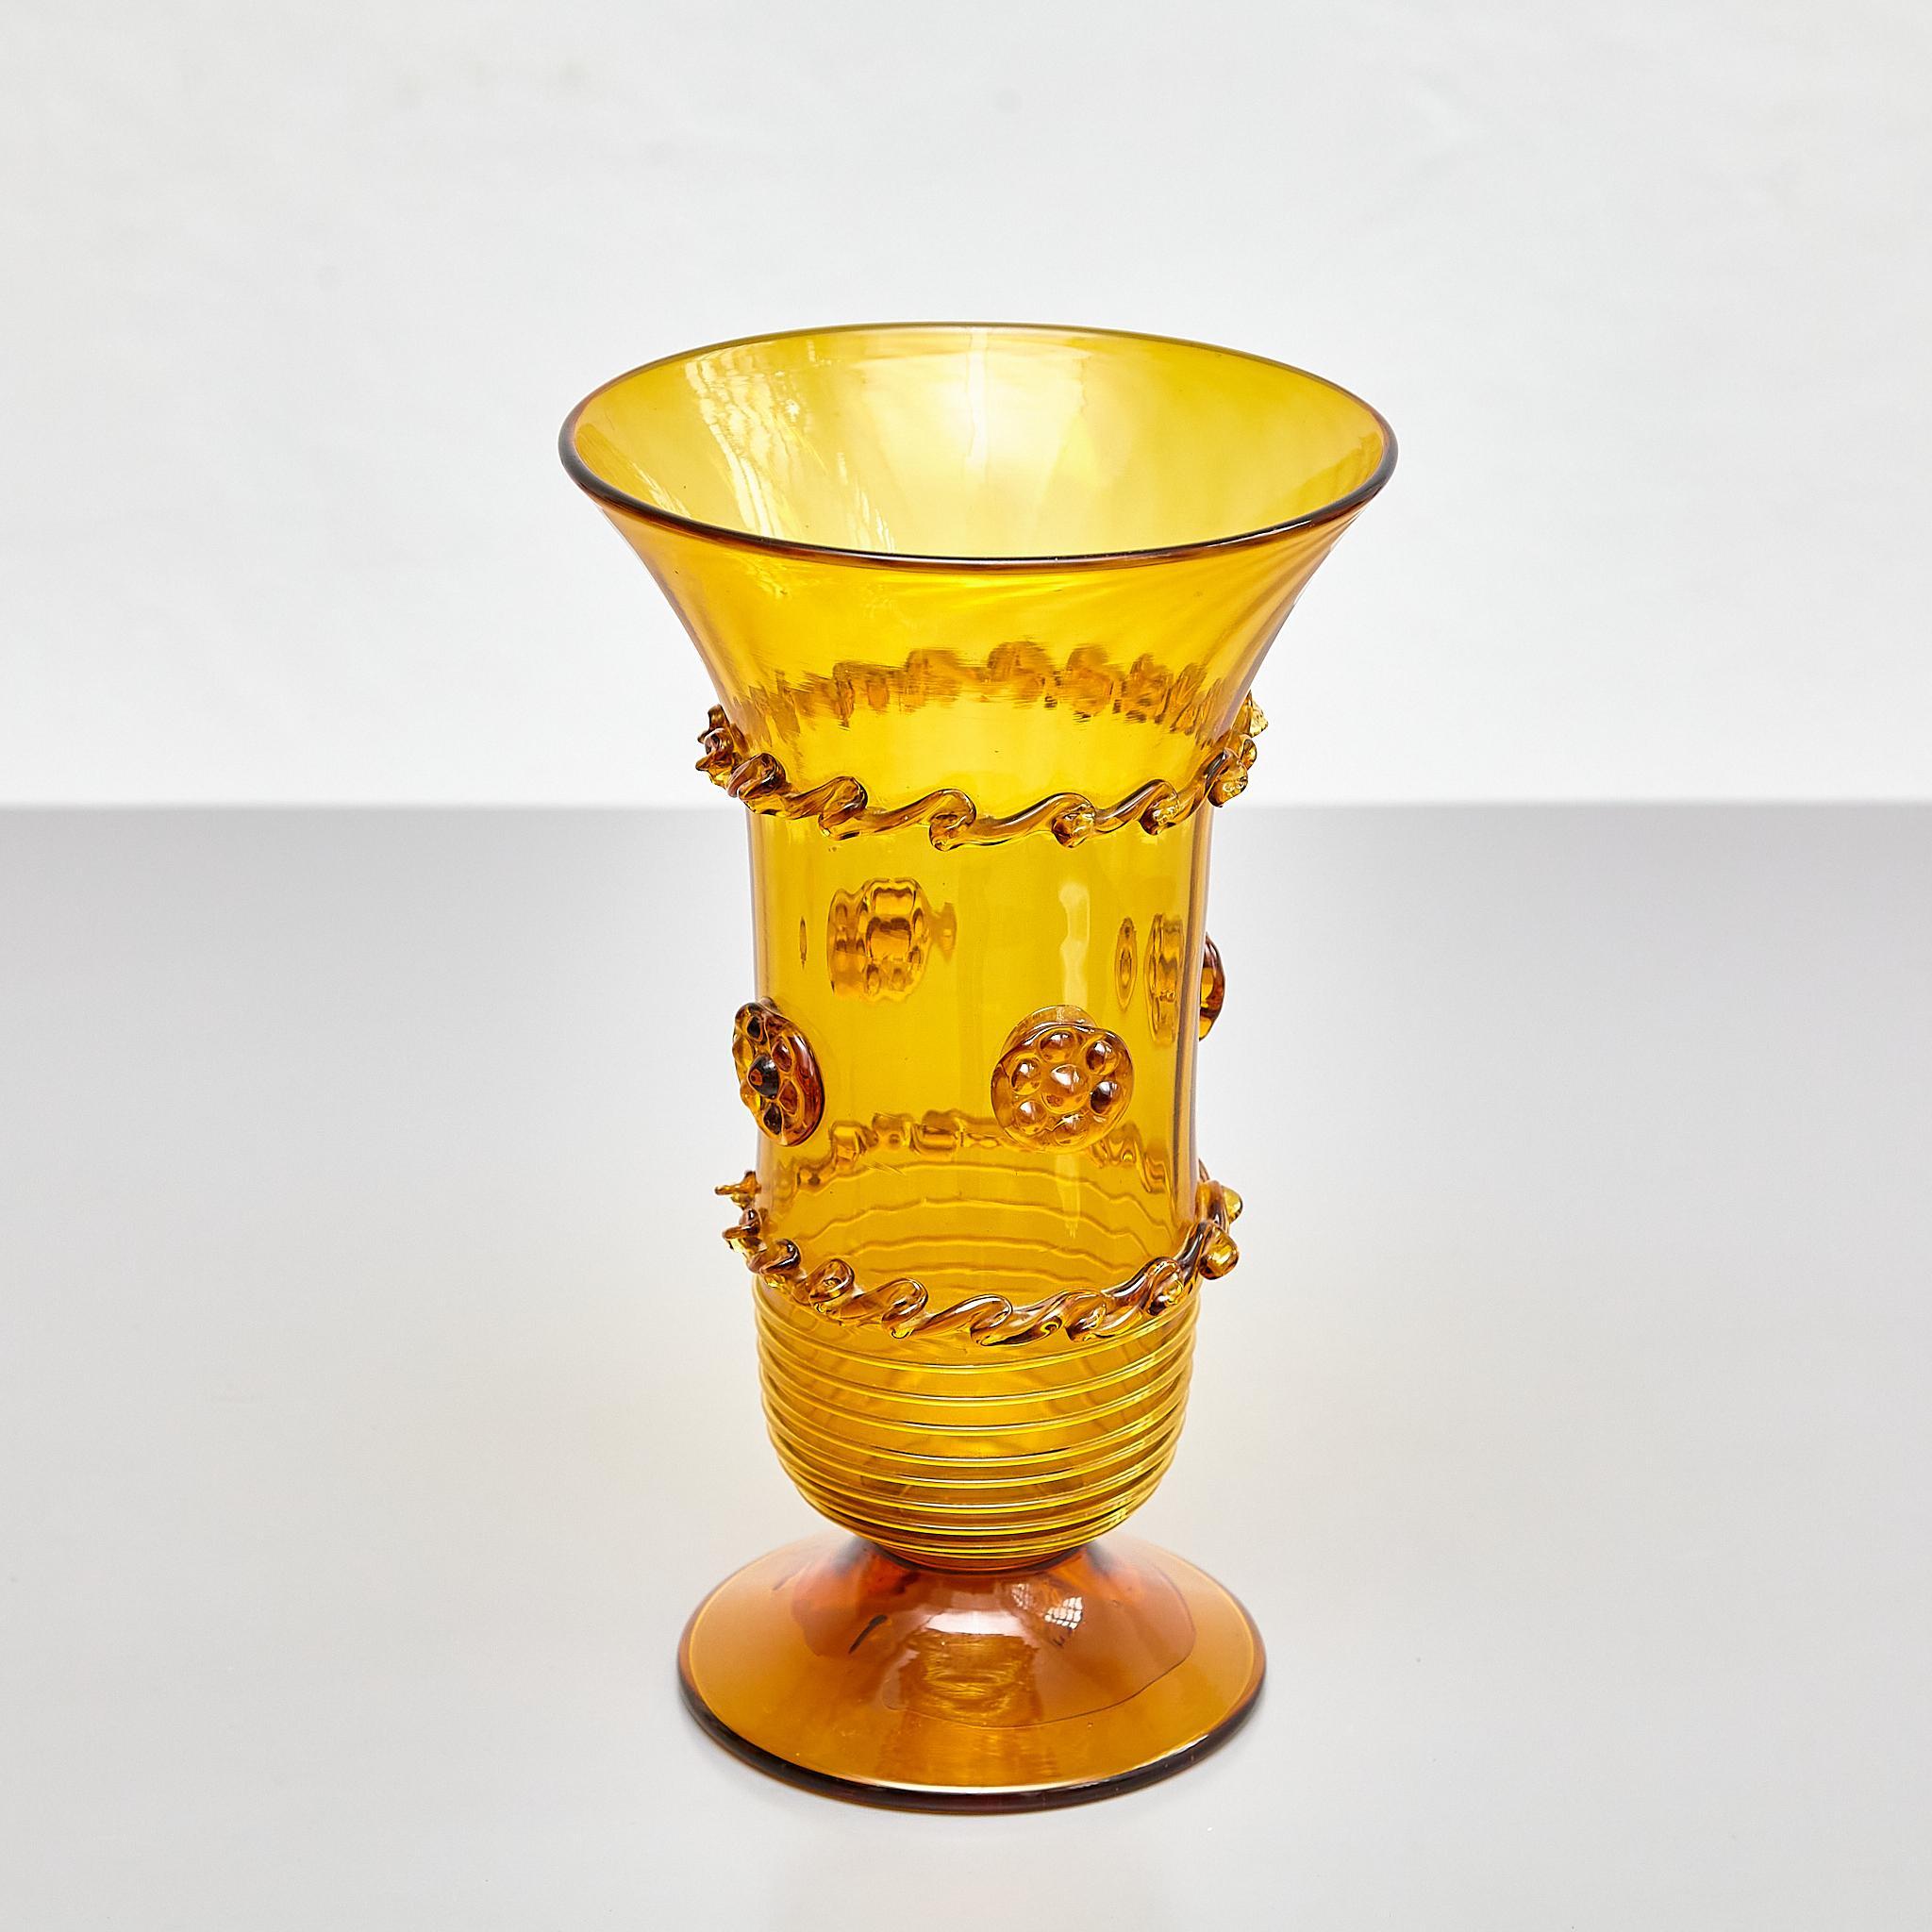 Rustic Elegant Amber Blown Glass Vase - Early 20th Century Spanish Artistry For Sale